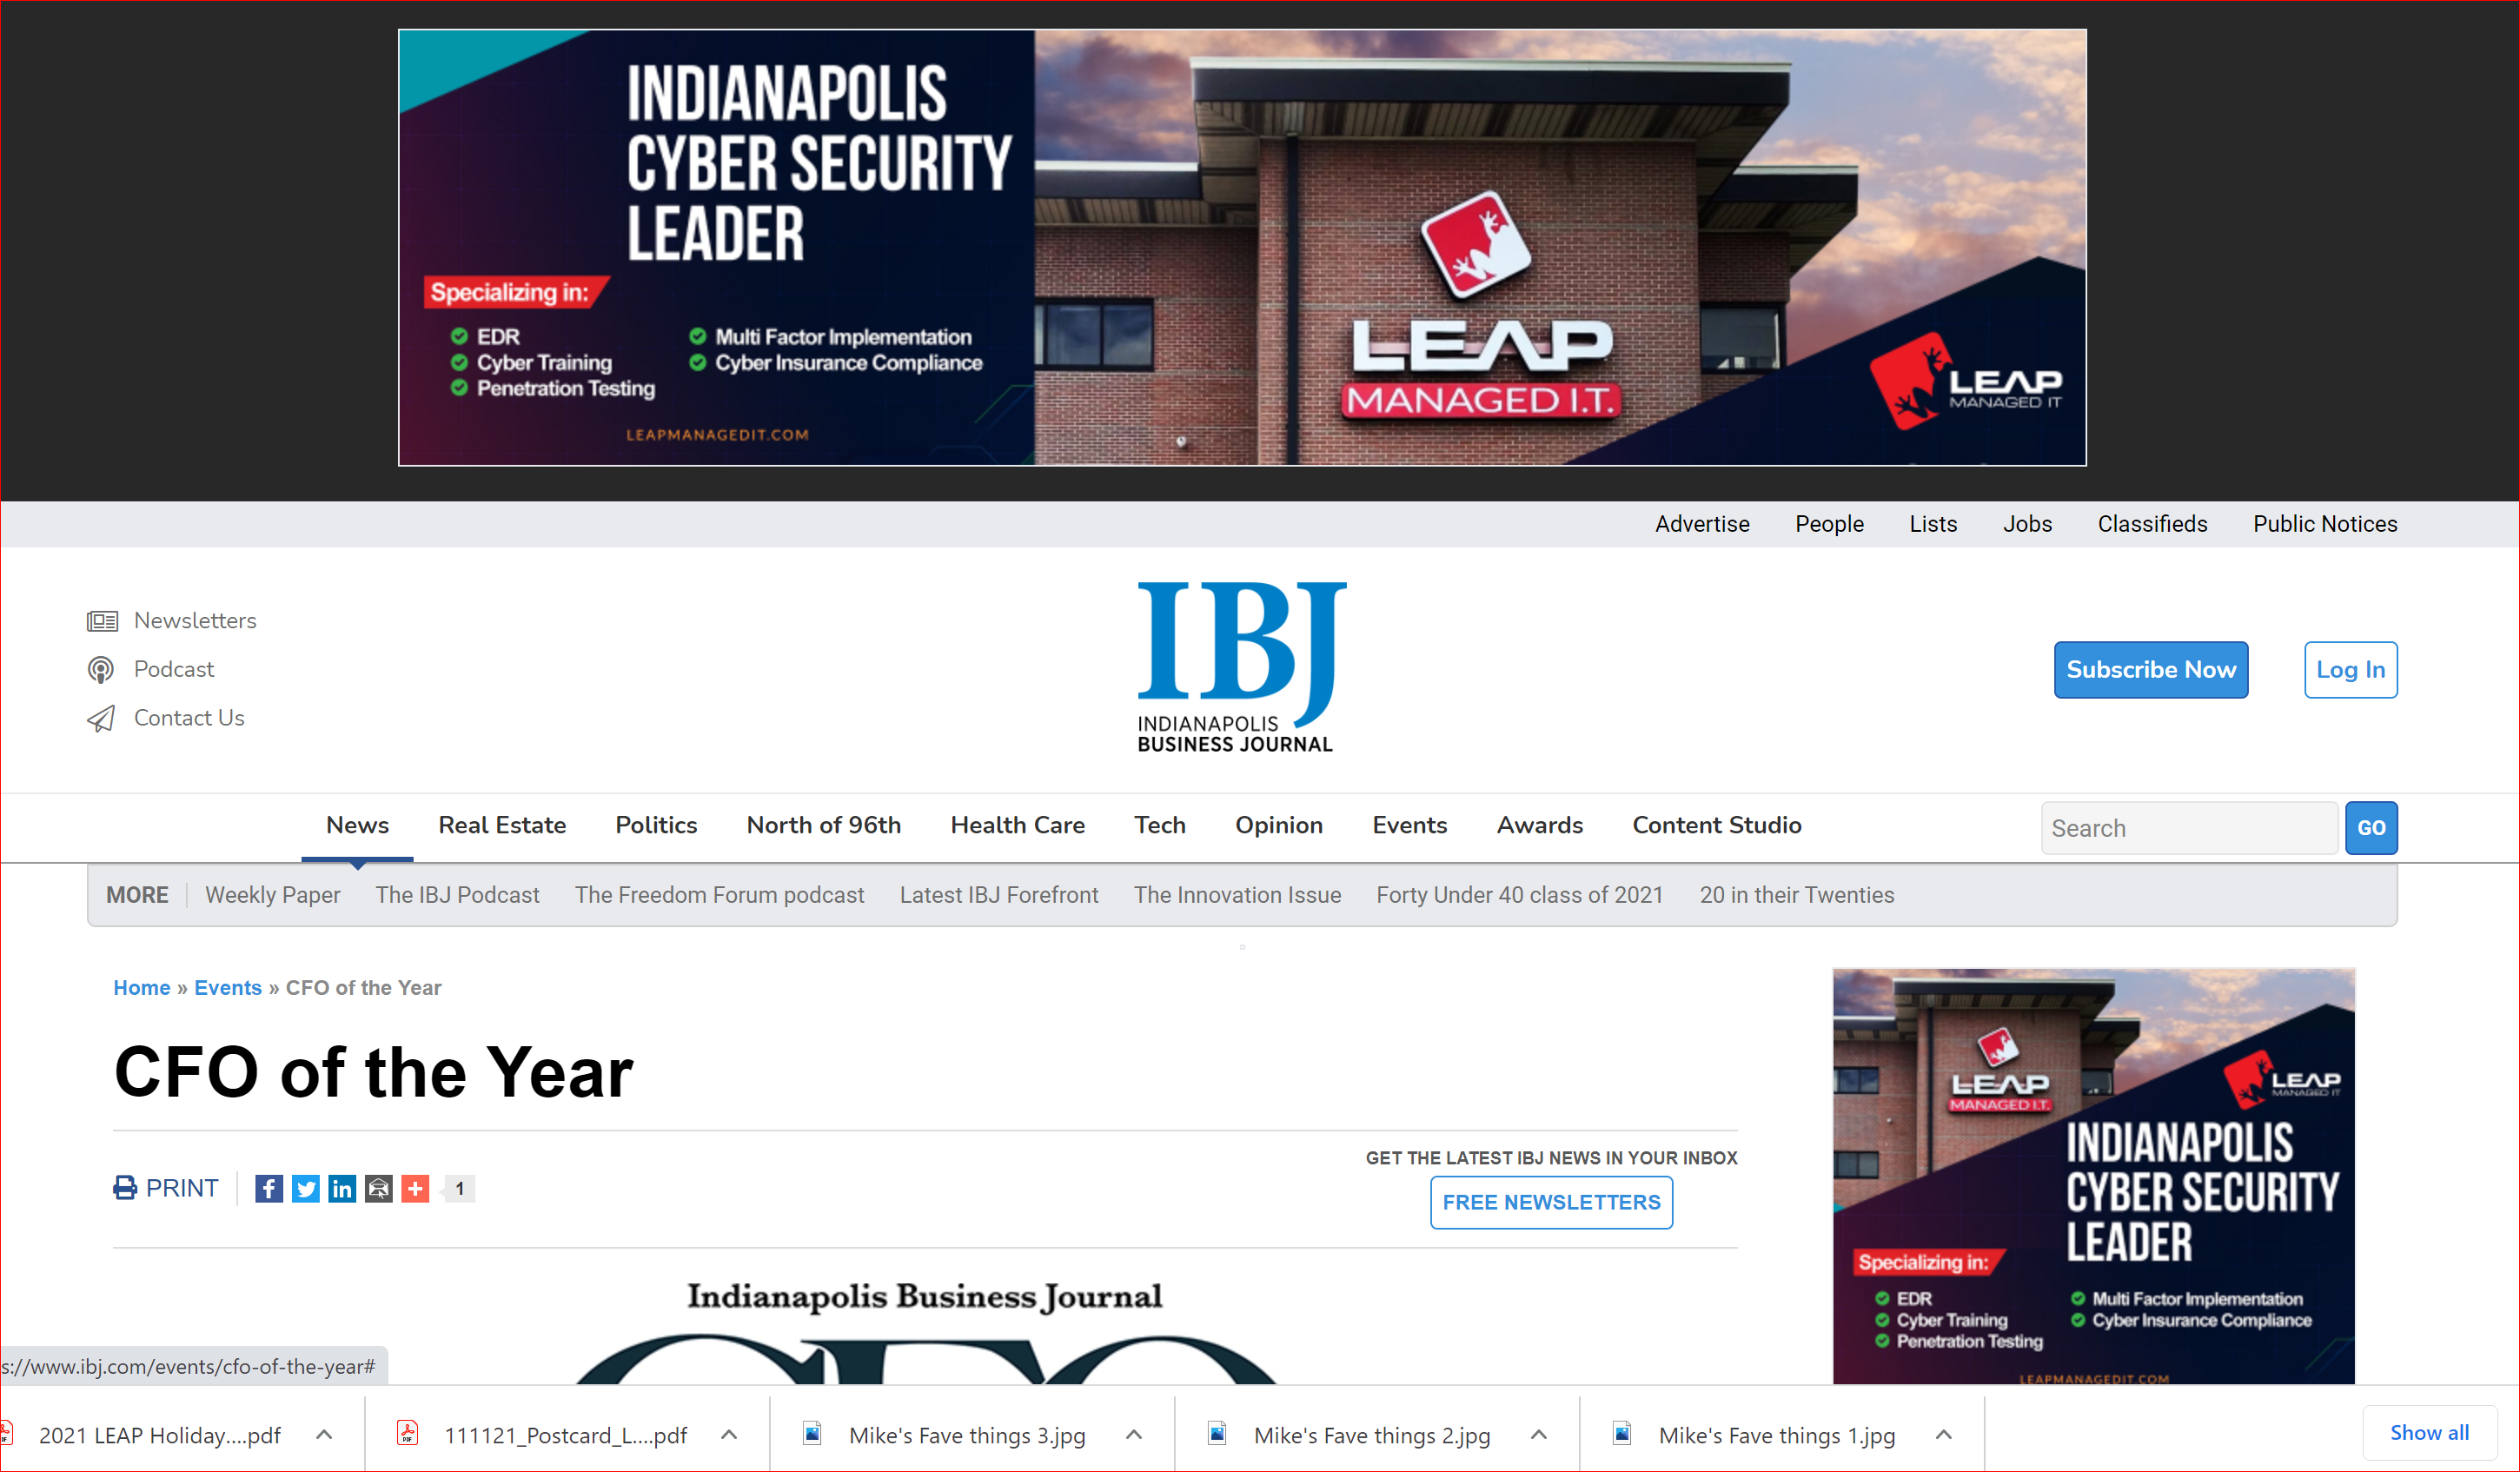 Indianapolis Business Journal CFO of the Year